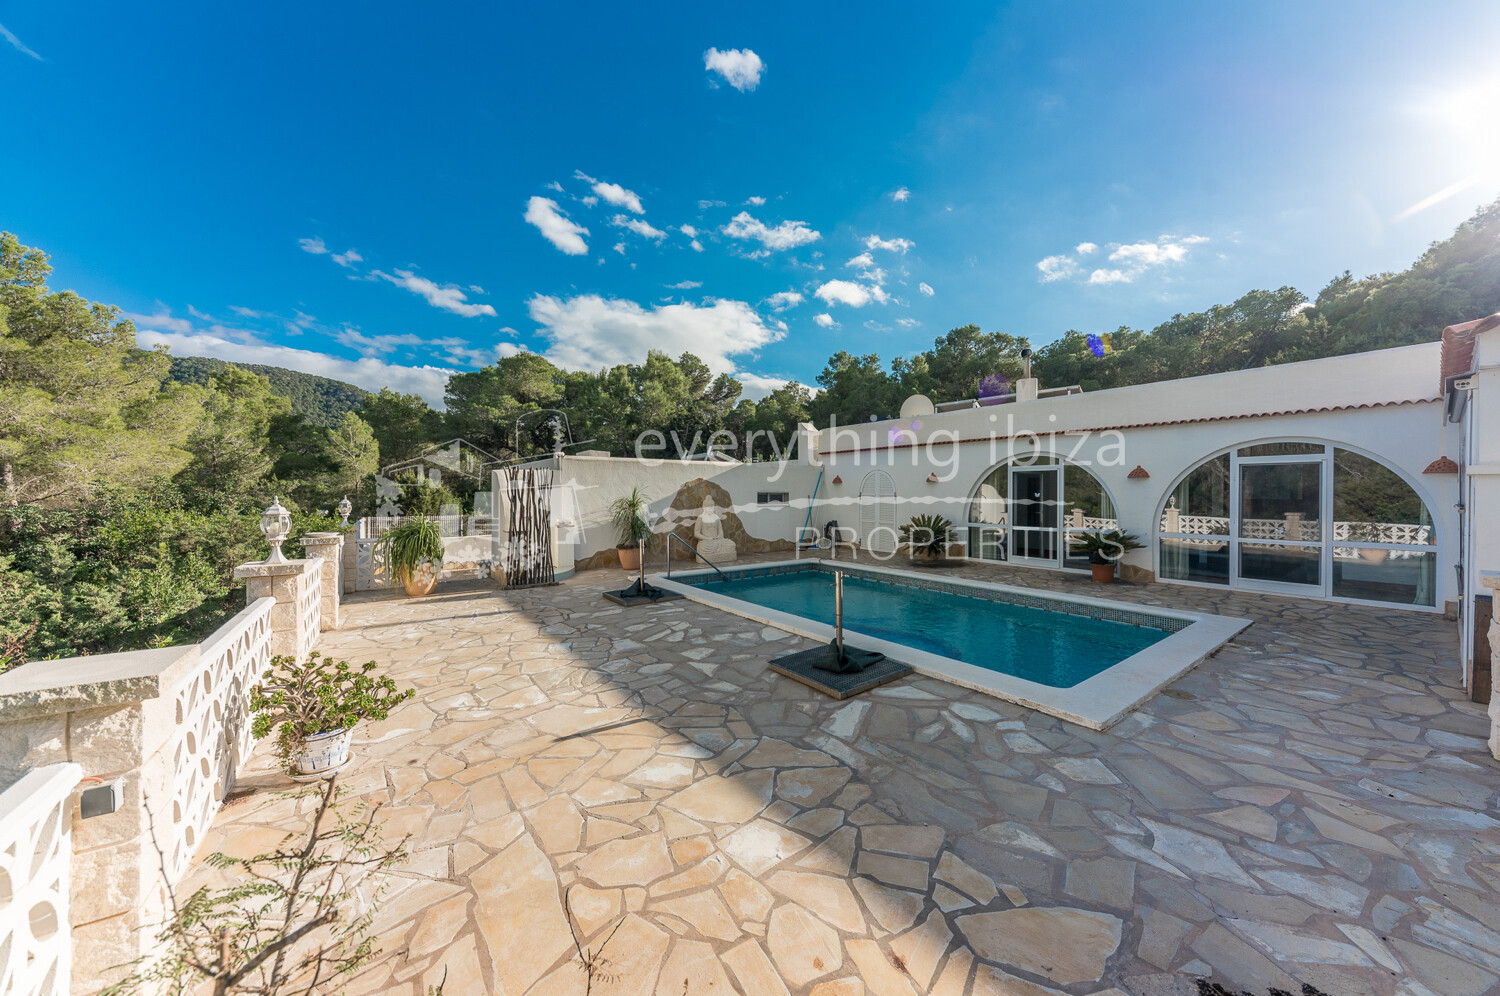 Lovely Detached Villa Close to Cala Vadella & Popular Beaches, ref. 1533, for sale in Ibiza by everything ibiza Properties